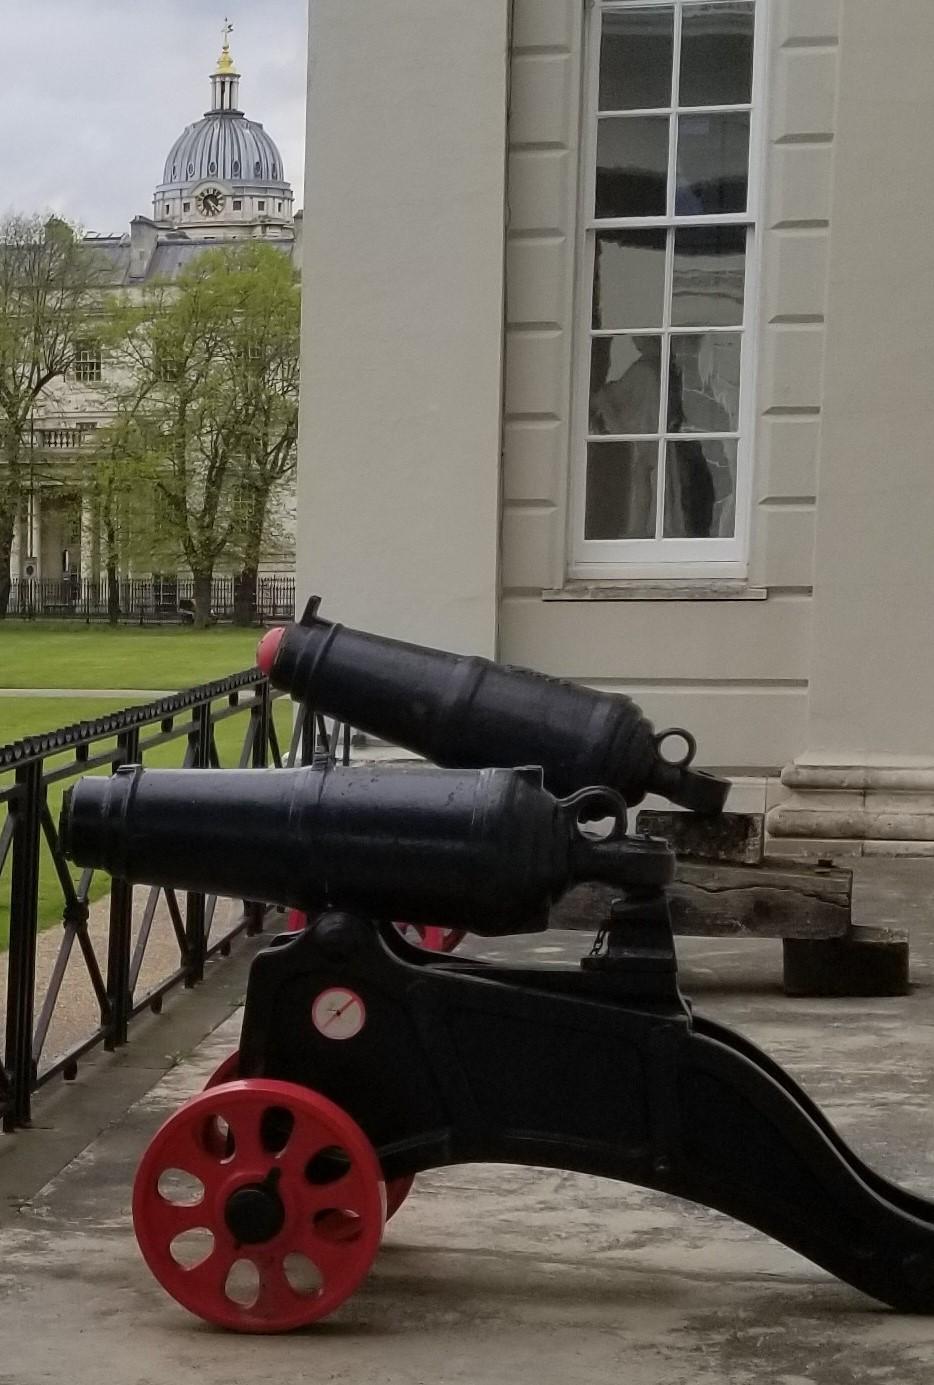 Two carronades in the grounds of the National Maritime Museum